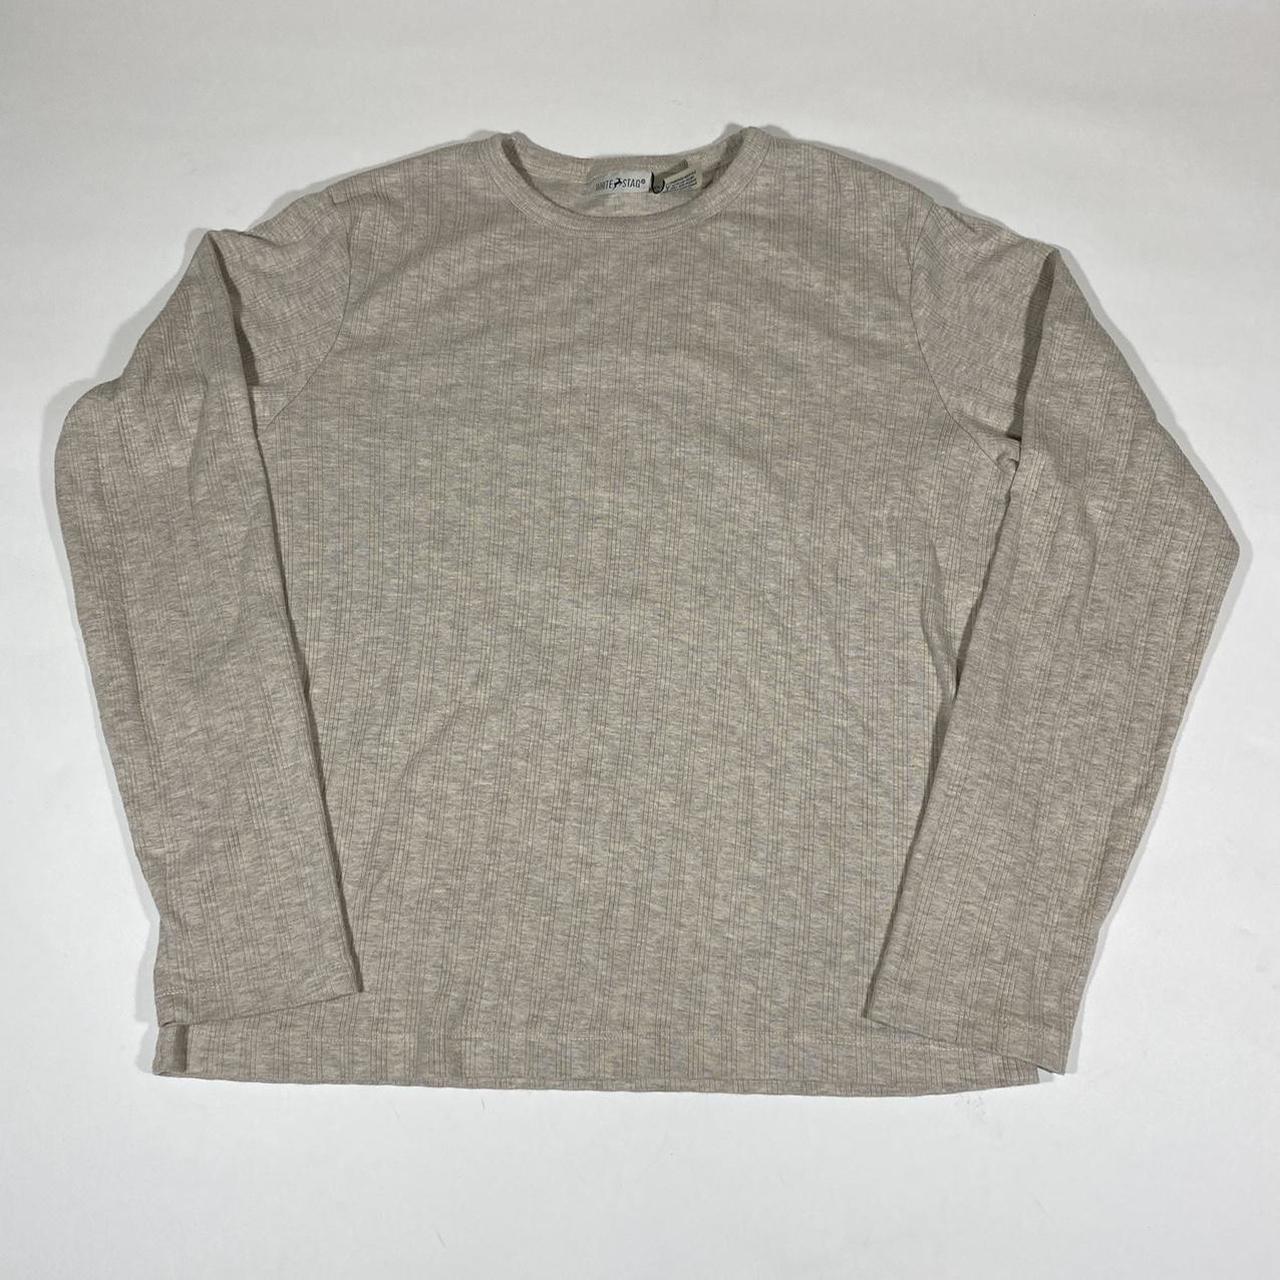 Product Image 1 - Vintage 90s tan ribbed longsleeve